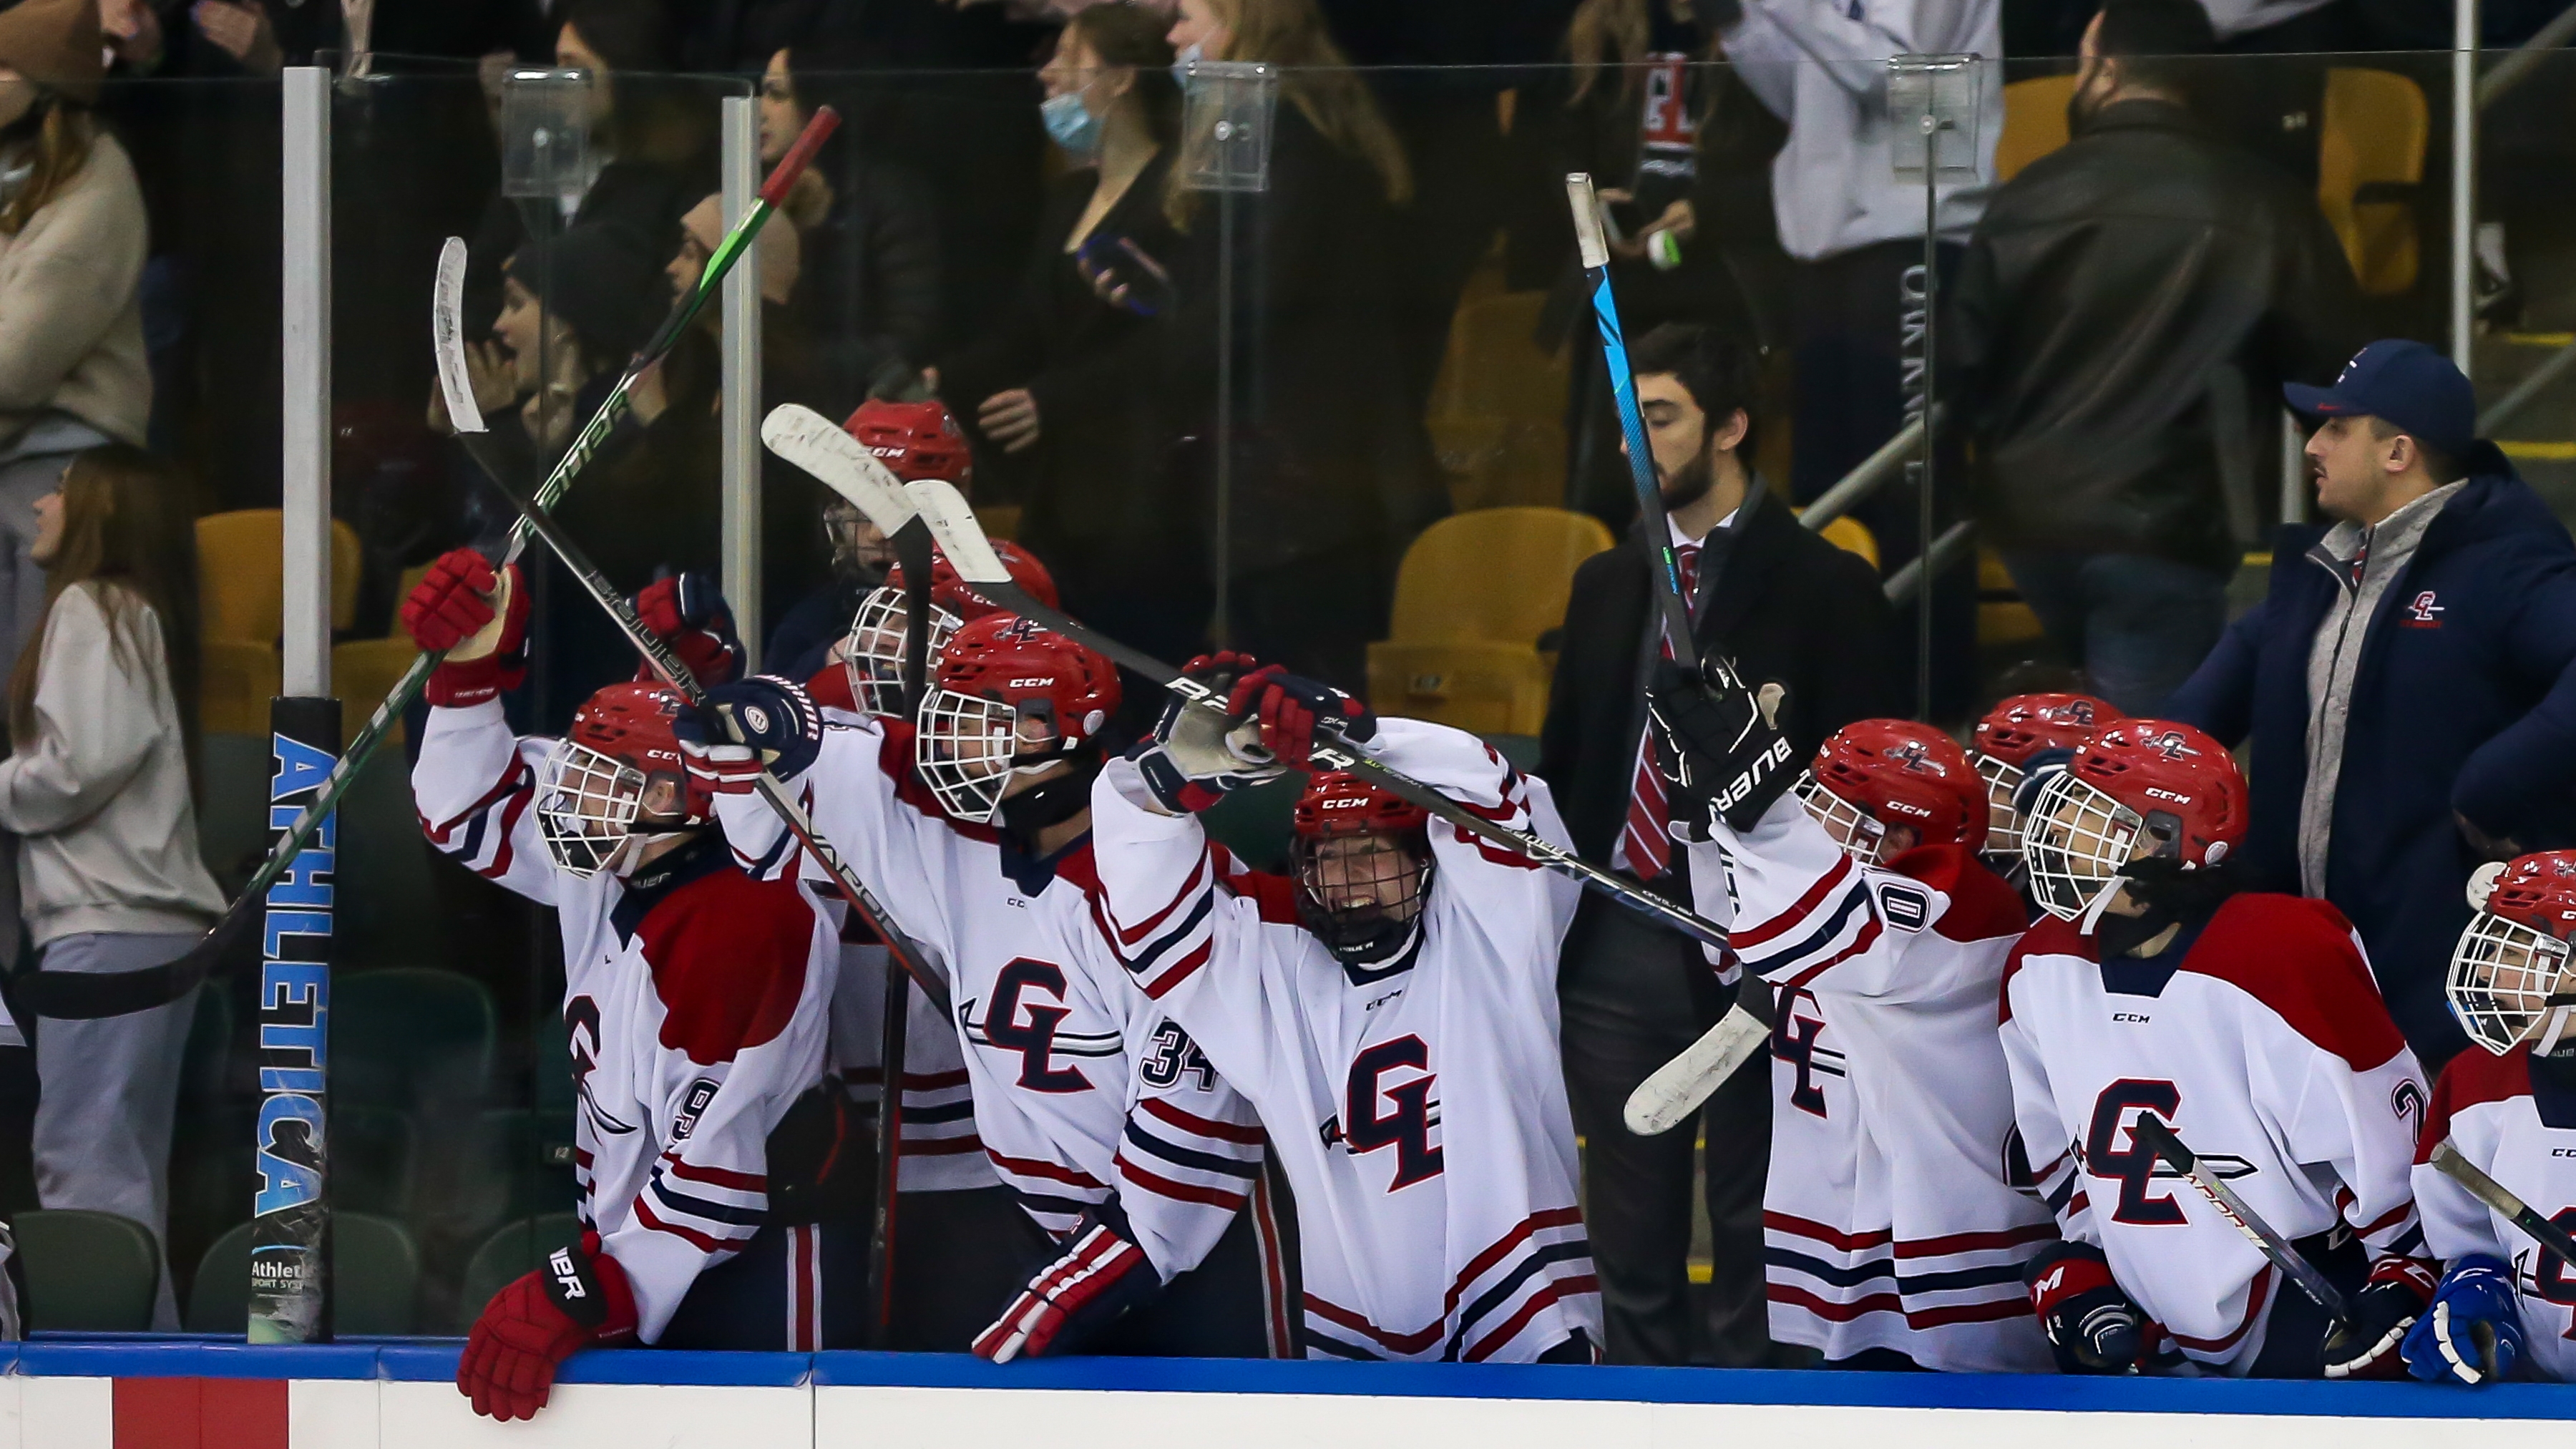 LIVE and FREE VIDEO of all 5 ice hockey state finals Monday, starting at 11 a.m.